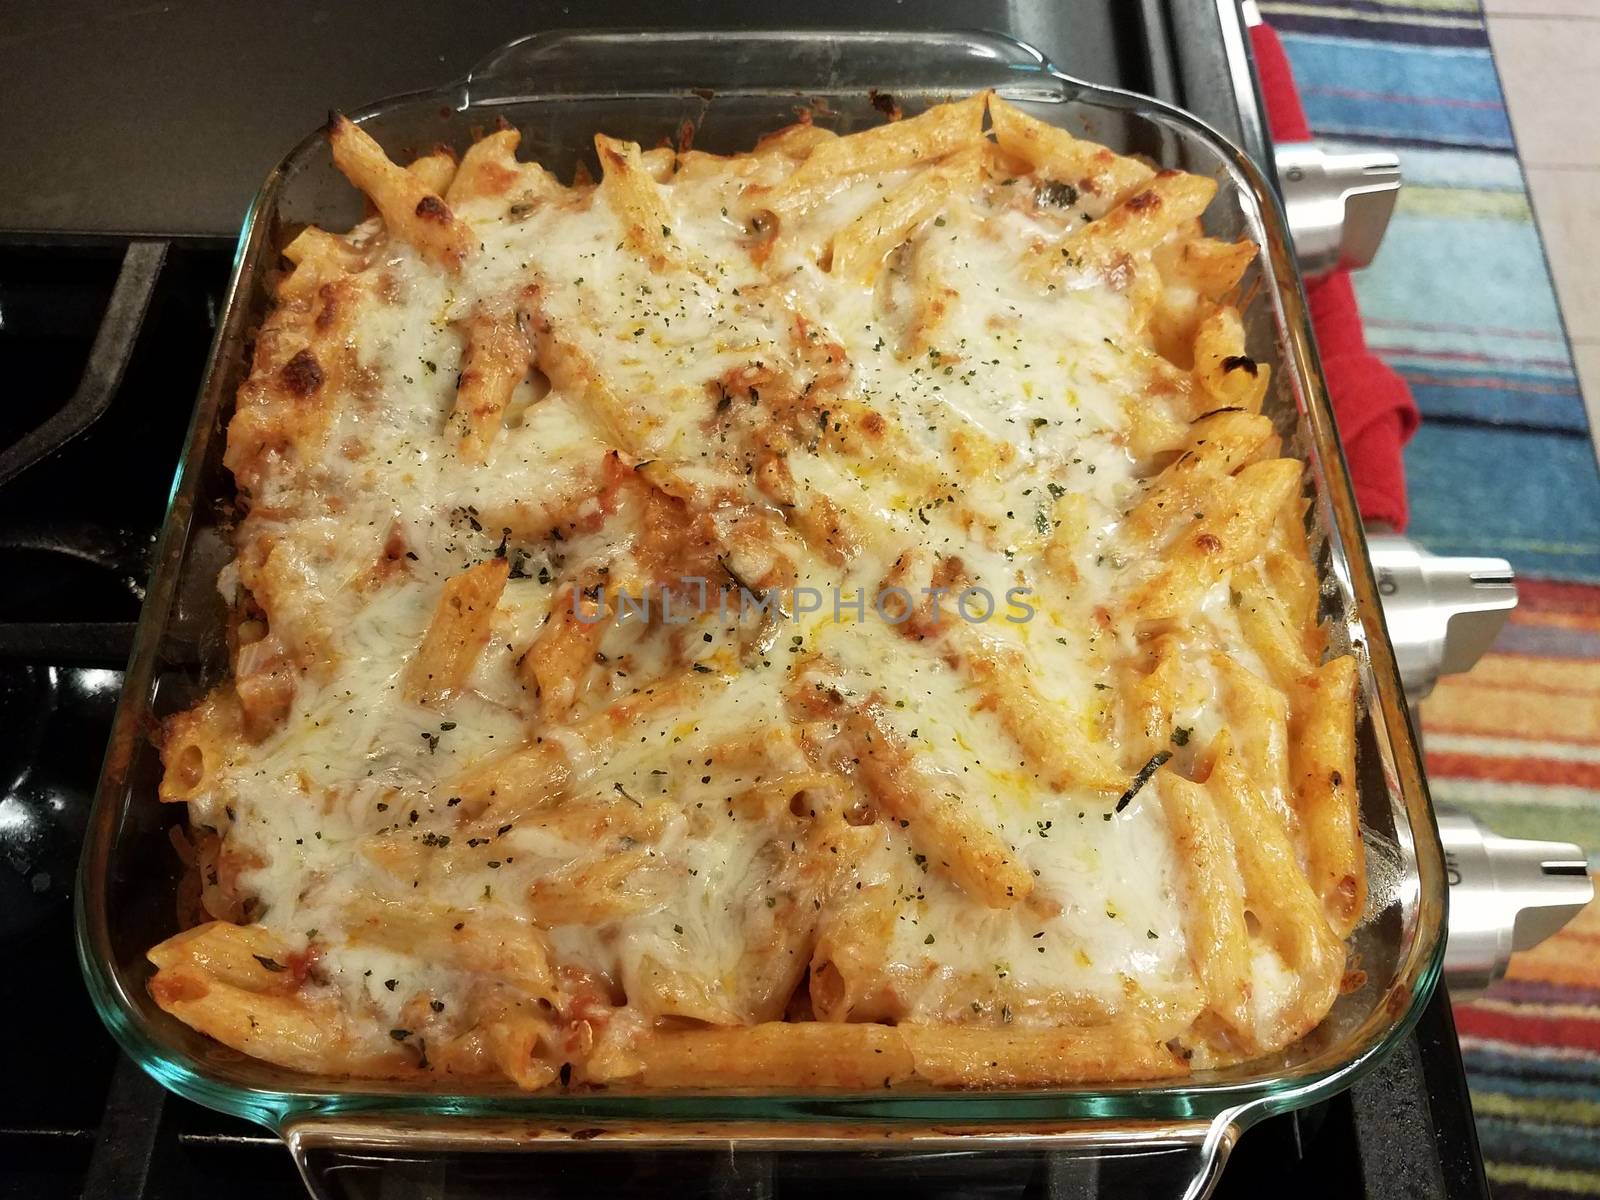 baked cheesy penne pasta in glass container on stove by stockphotofan1